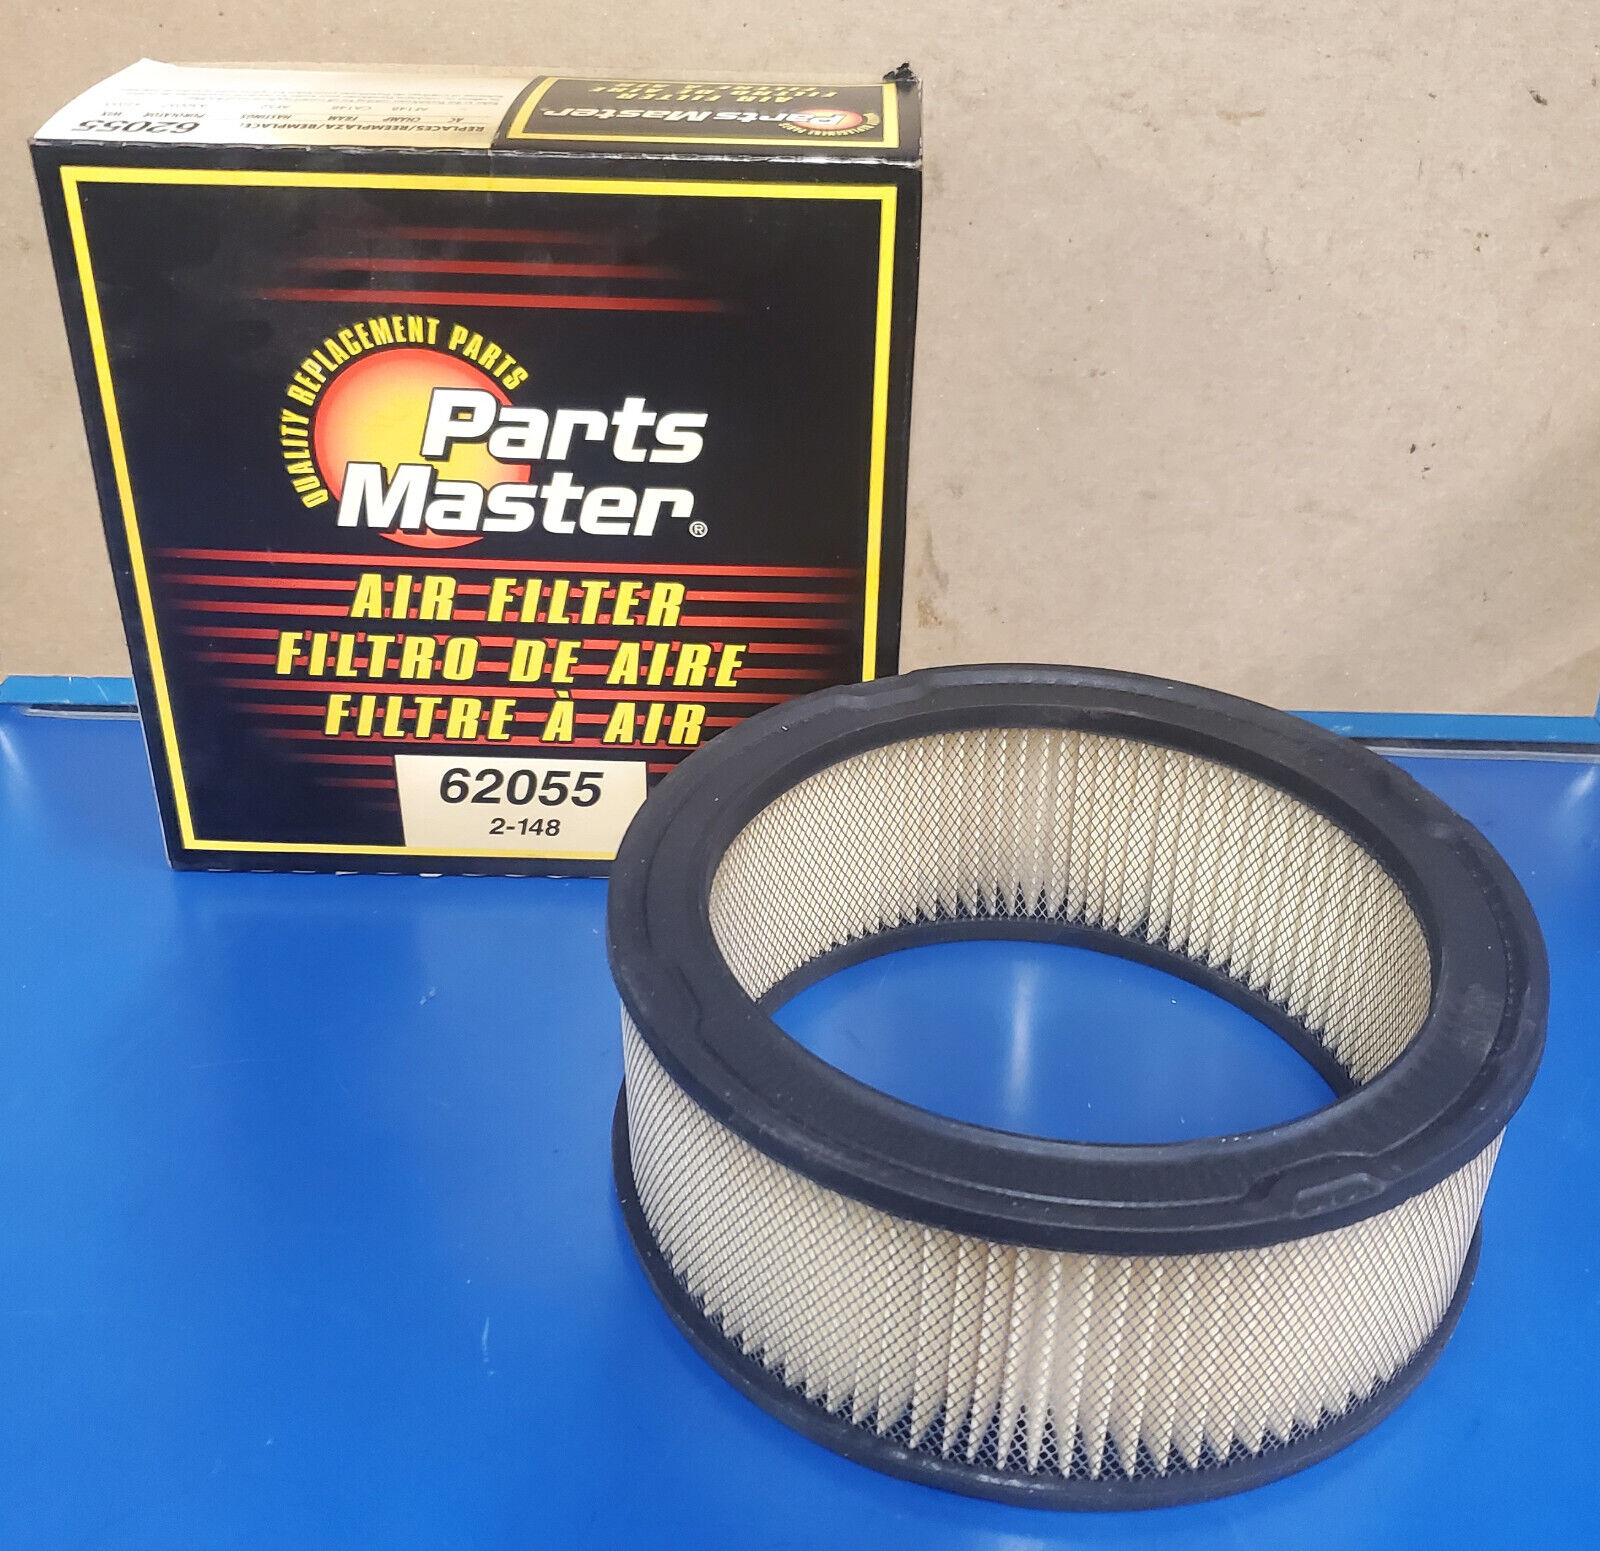 PARTS MASTER AIR FILTER 62055 NEW IN BOX - WIX # 42055